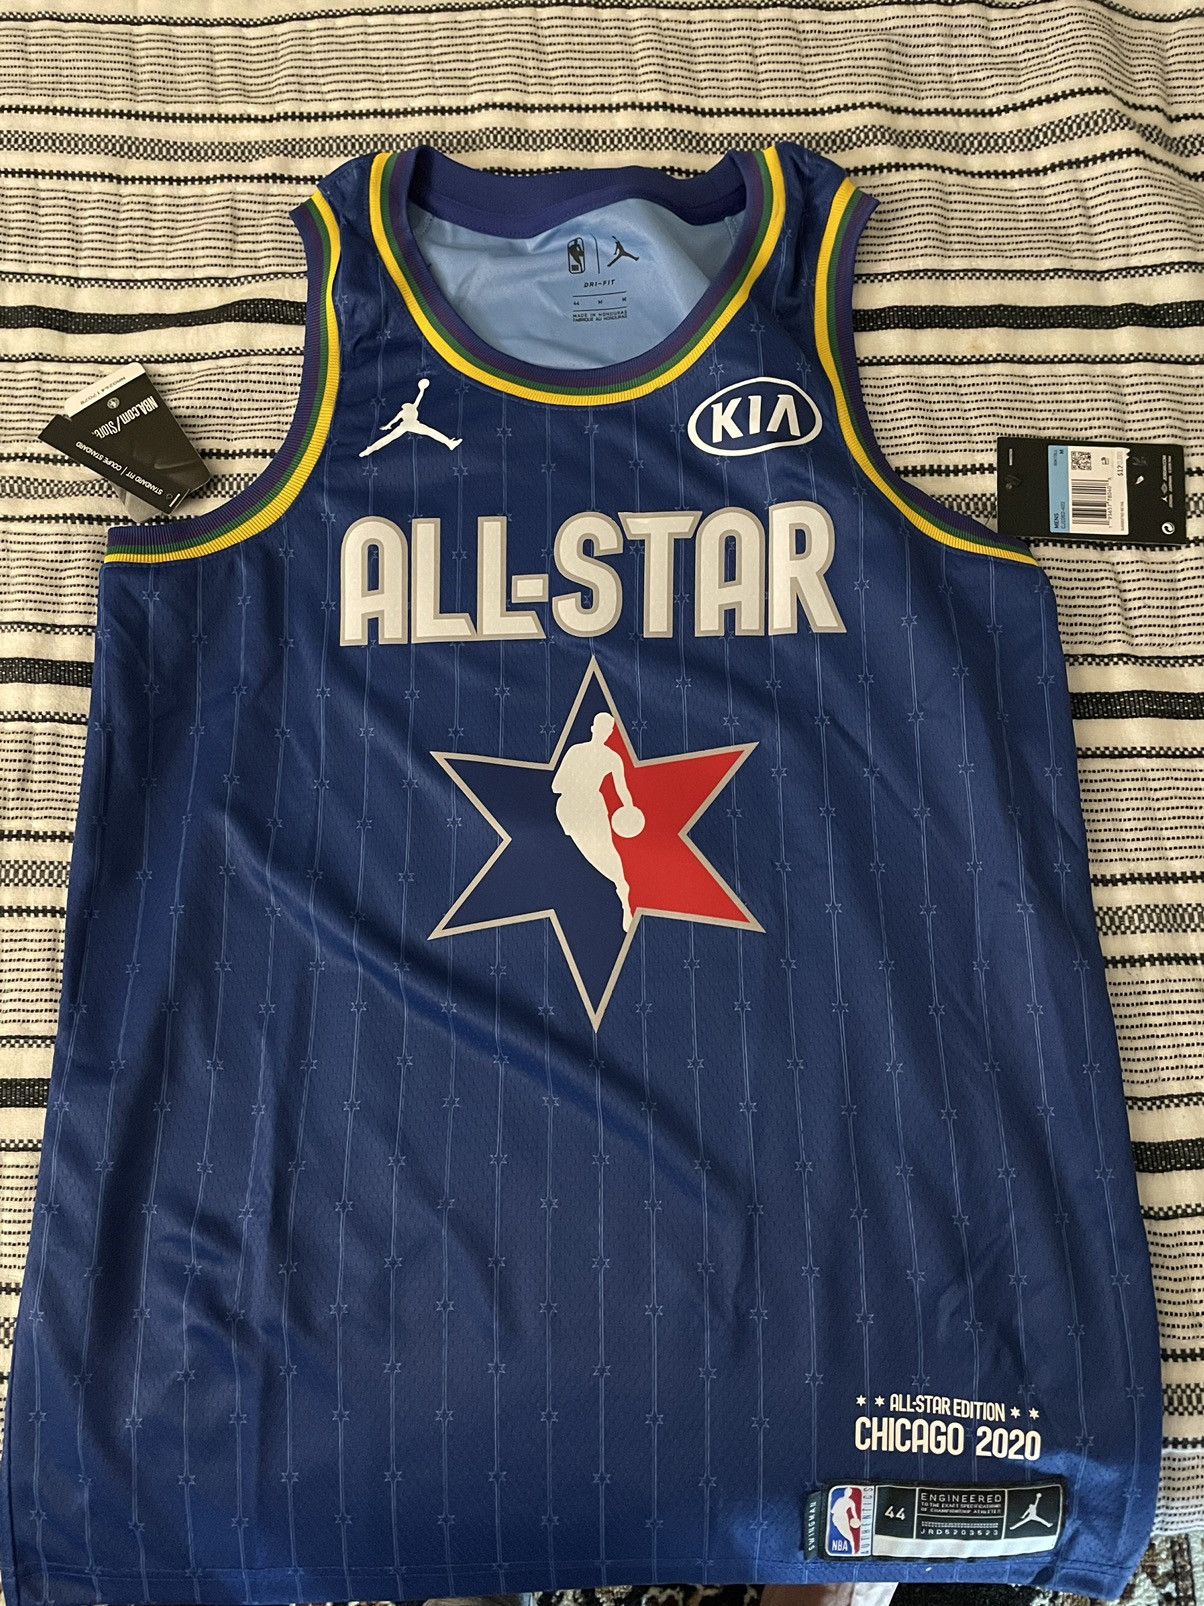 Nike Kyrie Irving NBA All Star Game 2020 Jersey